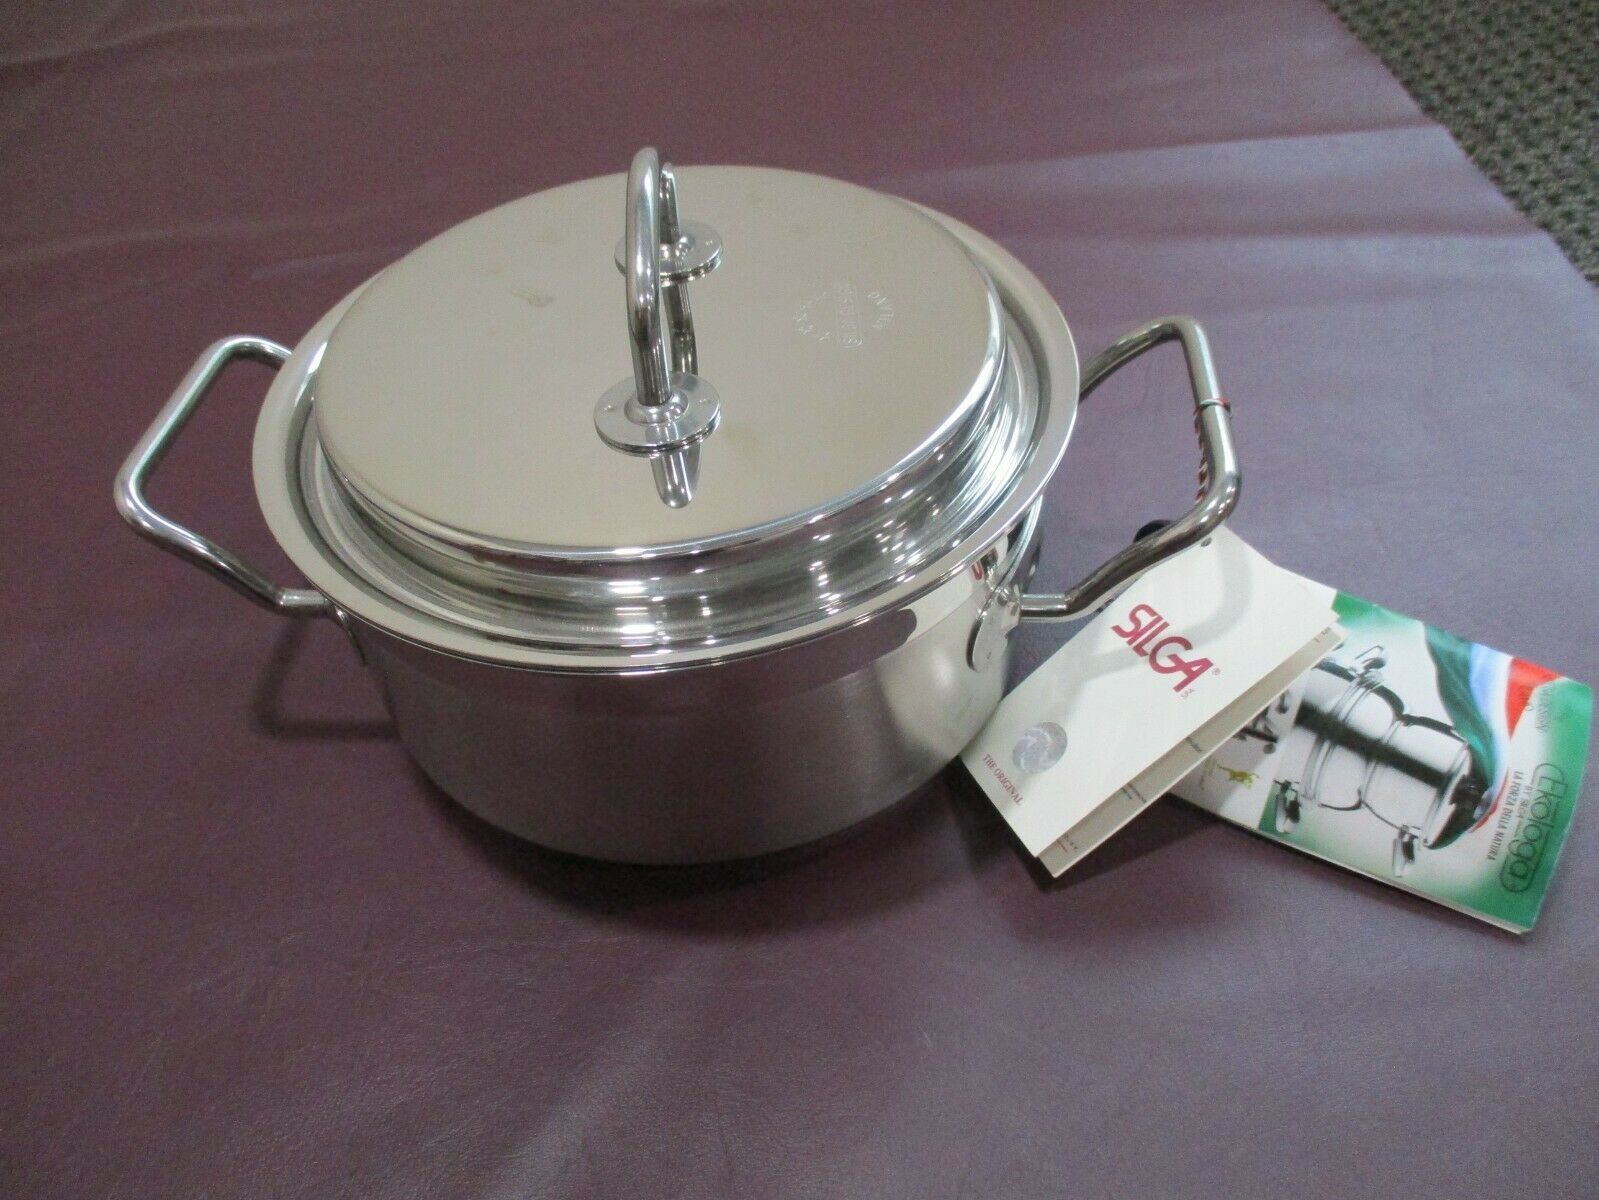 New - PARINI 3.5 QT STAINLESS DUTCH OVEN/STEAMER/TEMPERED GLASS LID Auction